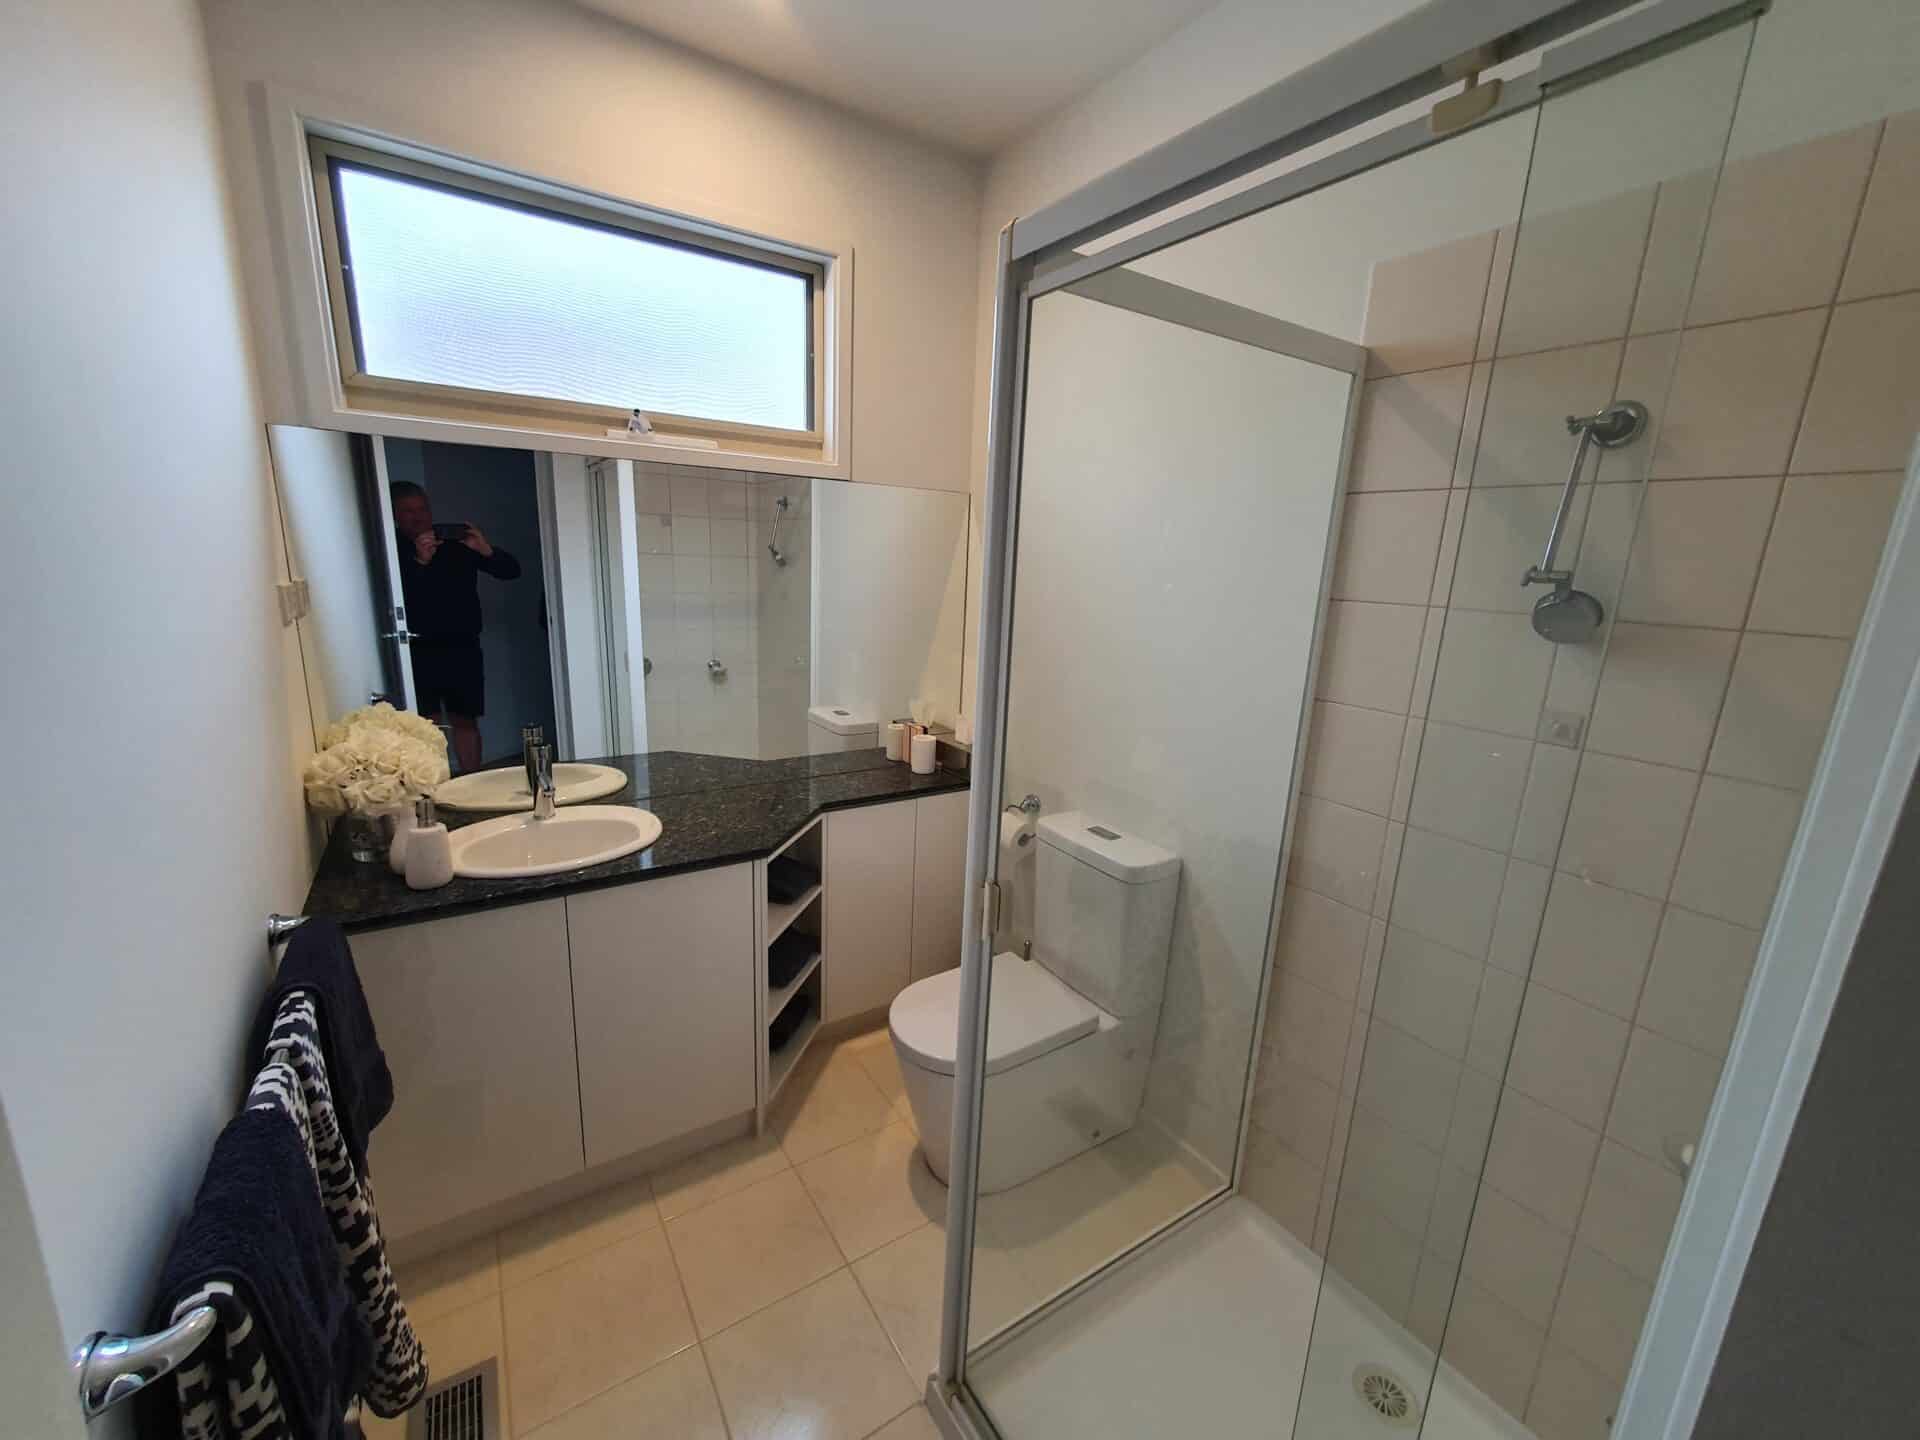 A bathroom with a walk in shower next to a sink.